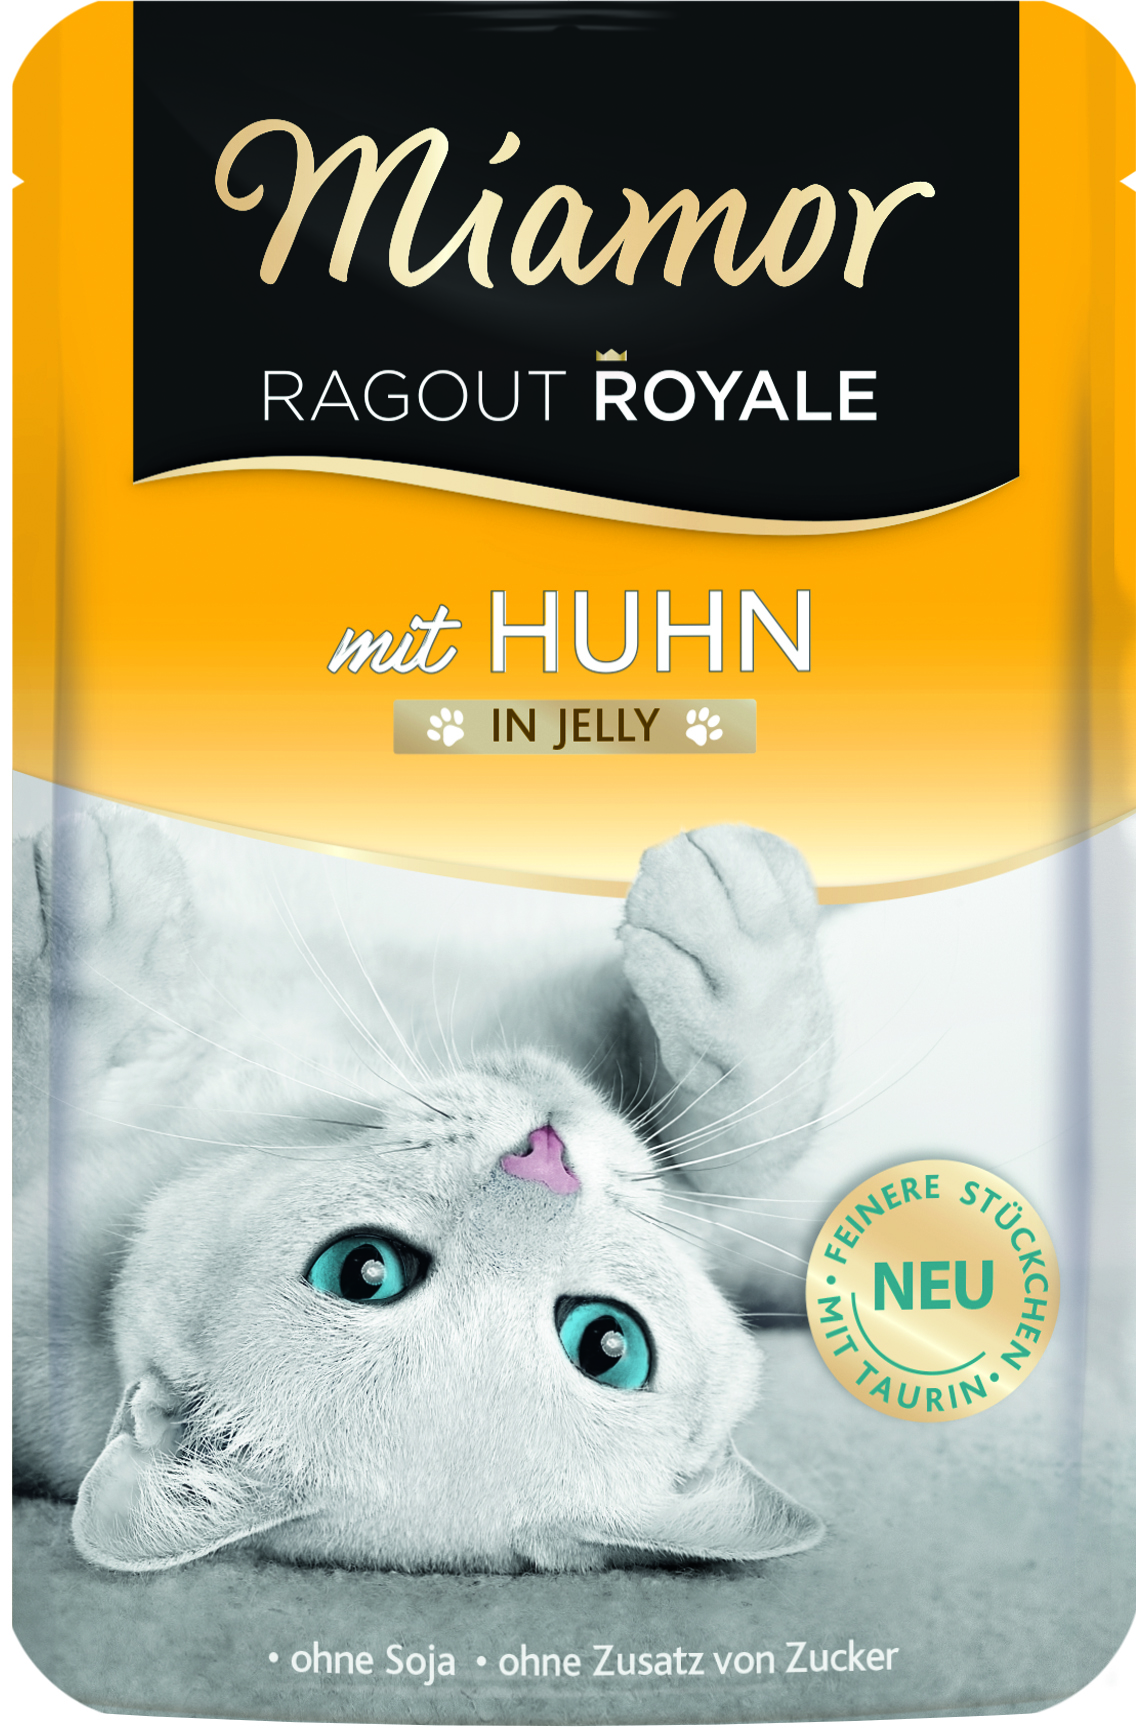 Miamor Ragout Royale Huhn in Jelly 100g